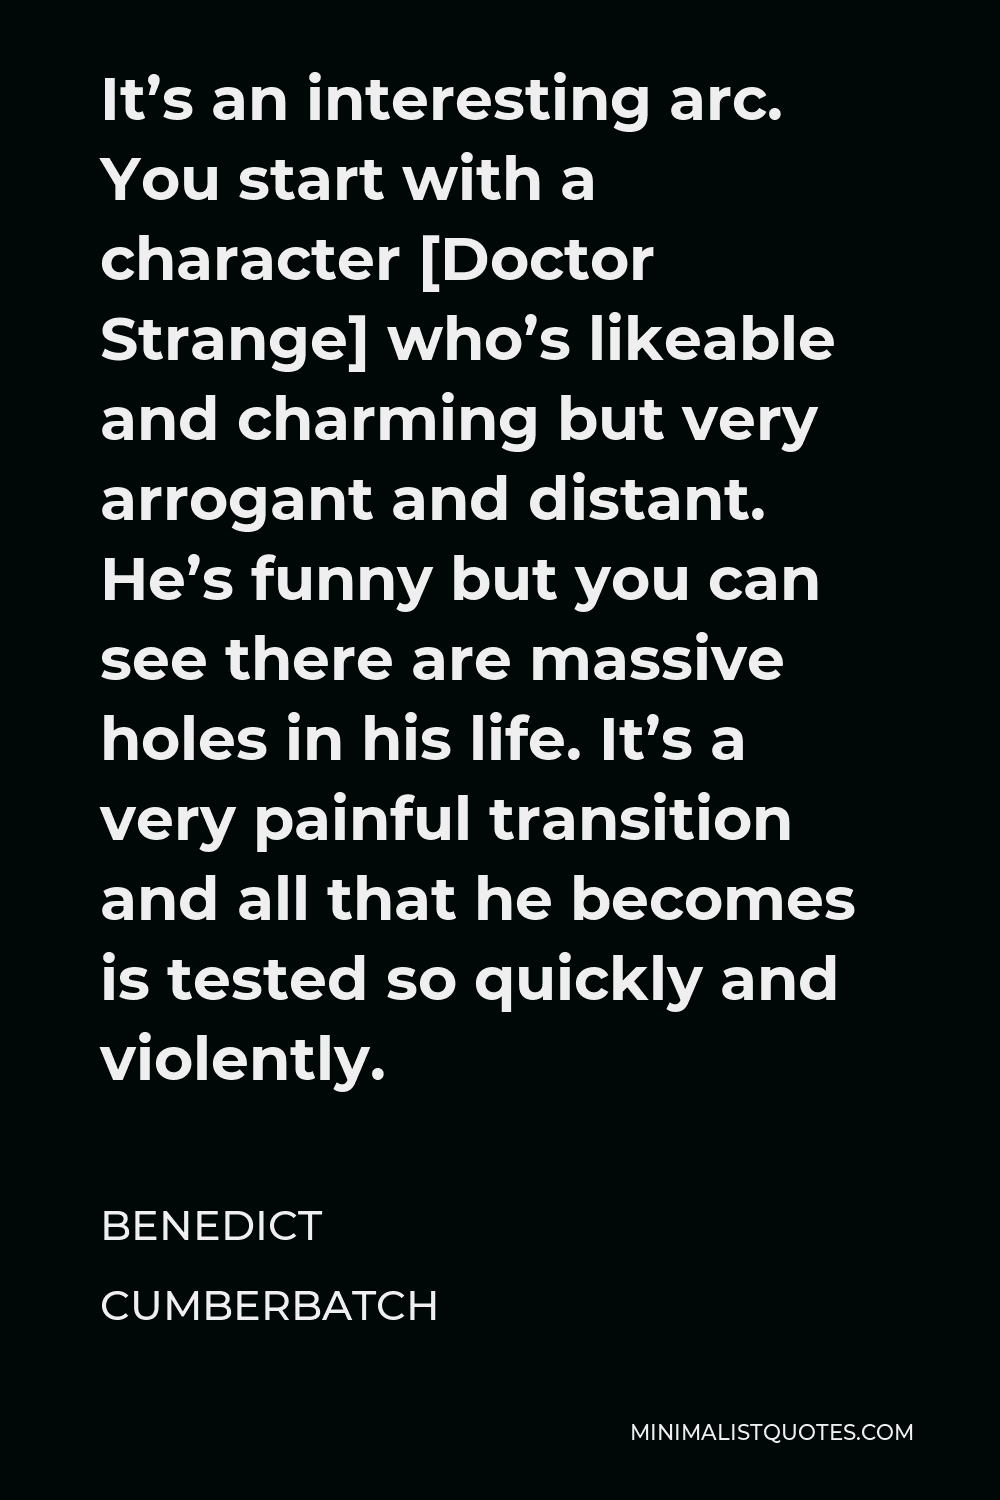 Benedict Cumberbatch Quote - It’s an interesting arc. You start with a character [Doctor Strange] who’s likeable and charming but very arrogant and distant. He’s funny but you can see there are massive holes in his life. It’s a very painful transition and all that he becomes is tested so quickly and violently.